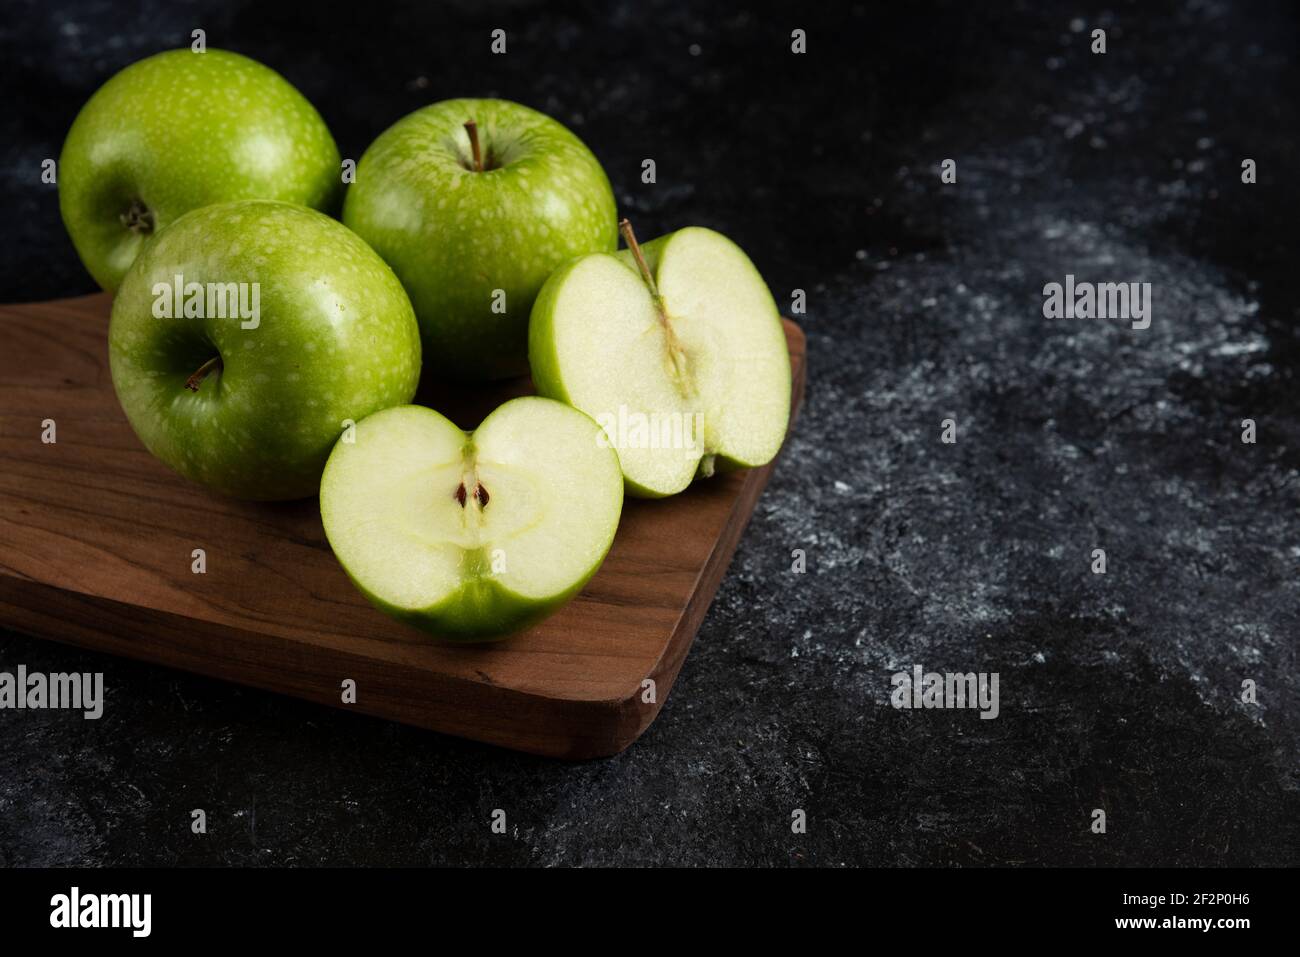 Whole and sliced ripe green apples on wooden board Stock Photo